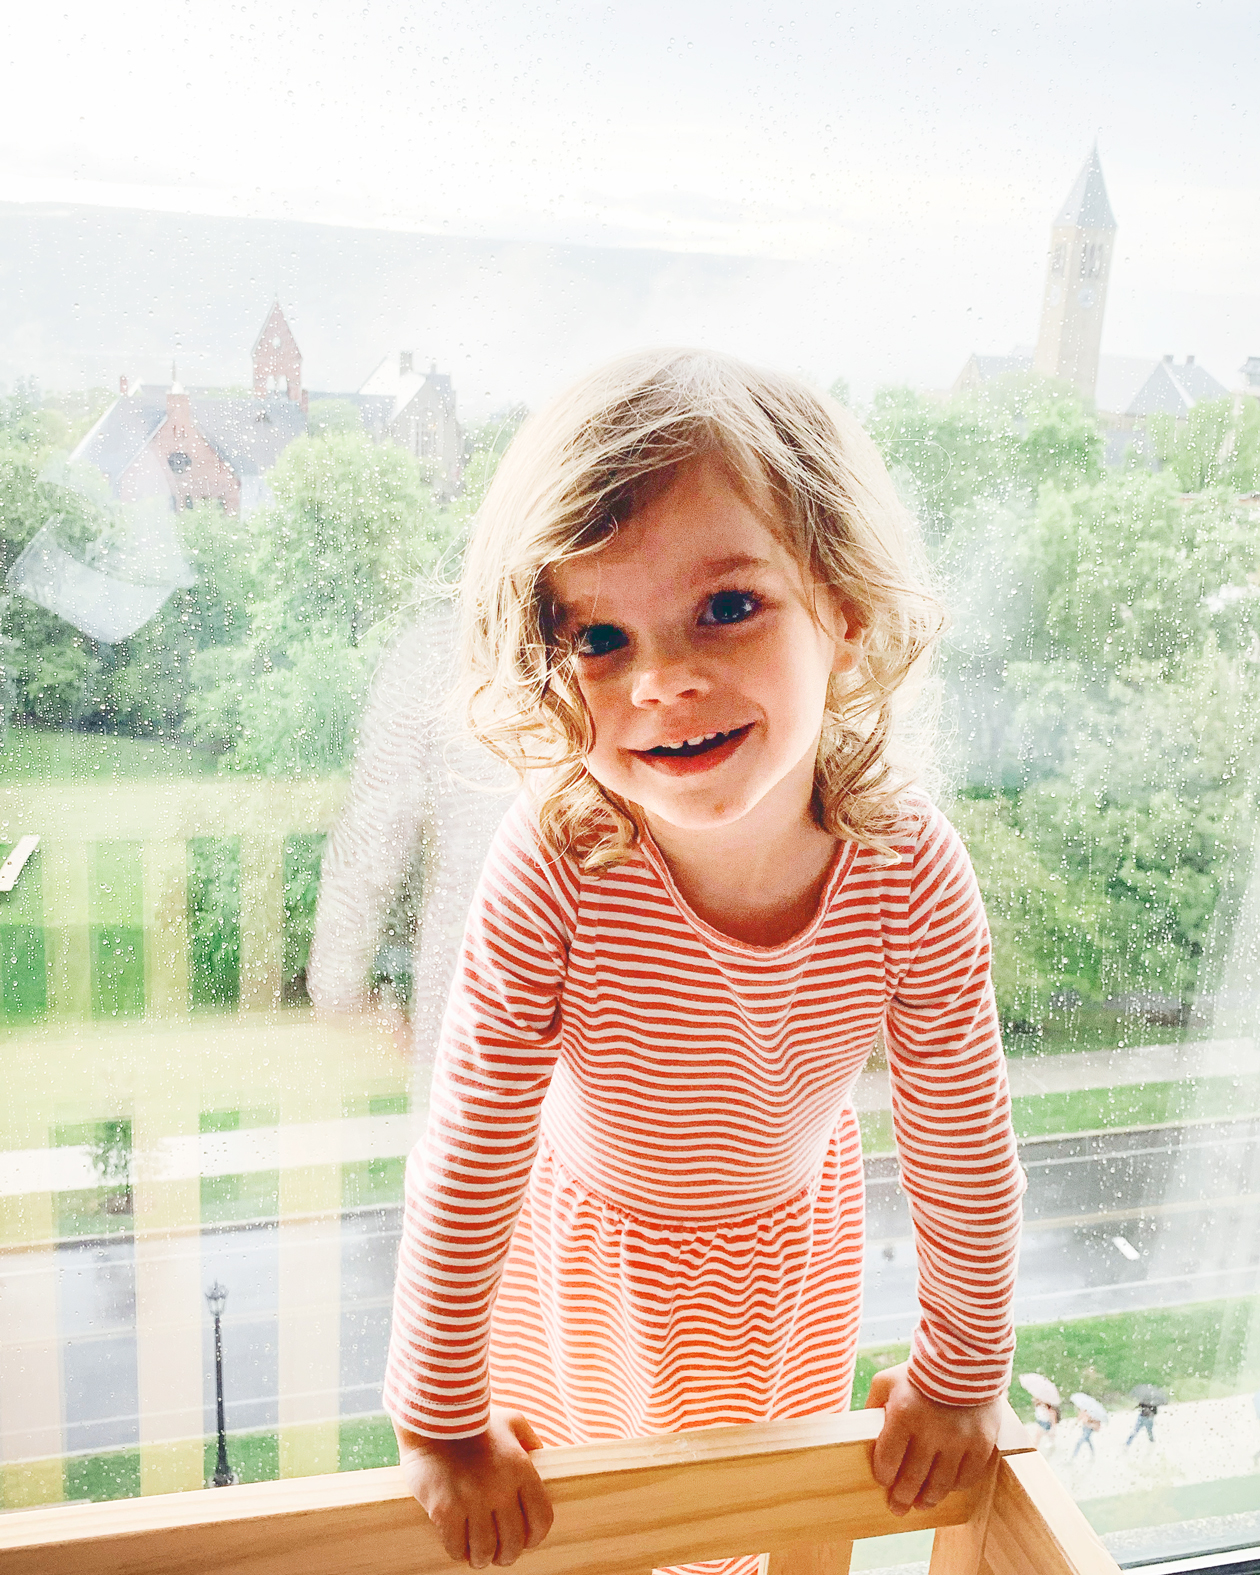 A toddler girl wearing a red and white striped dress standing in front of a glass window with trees and buildings behind her